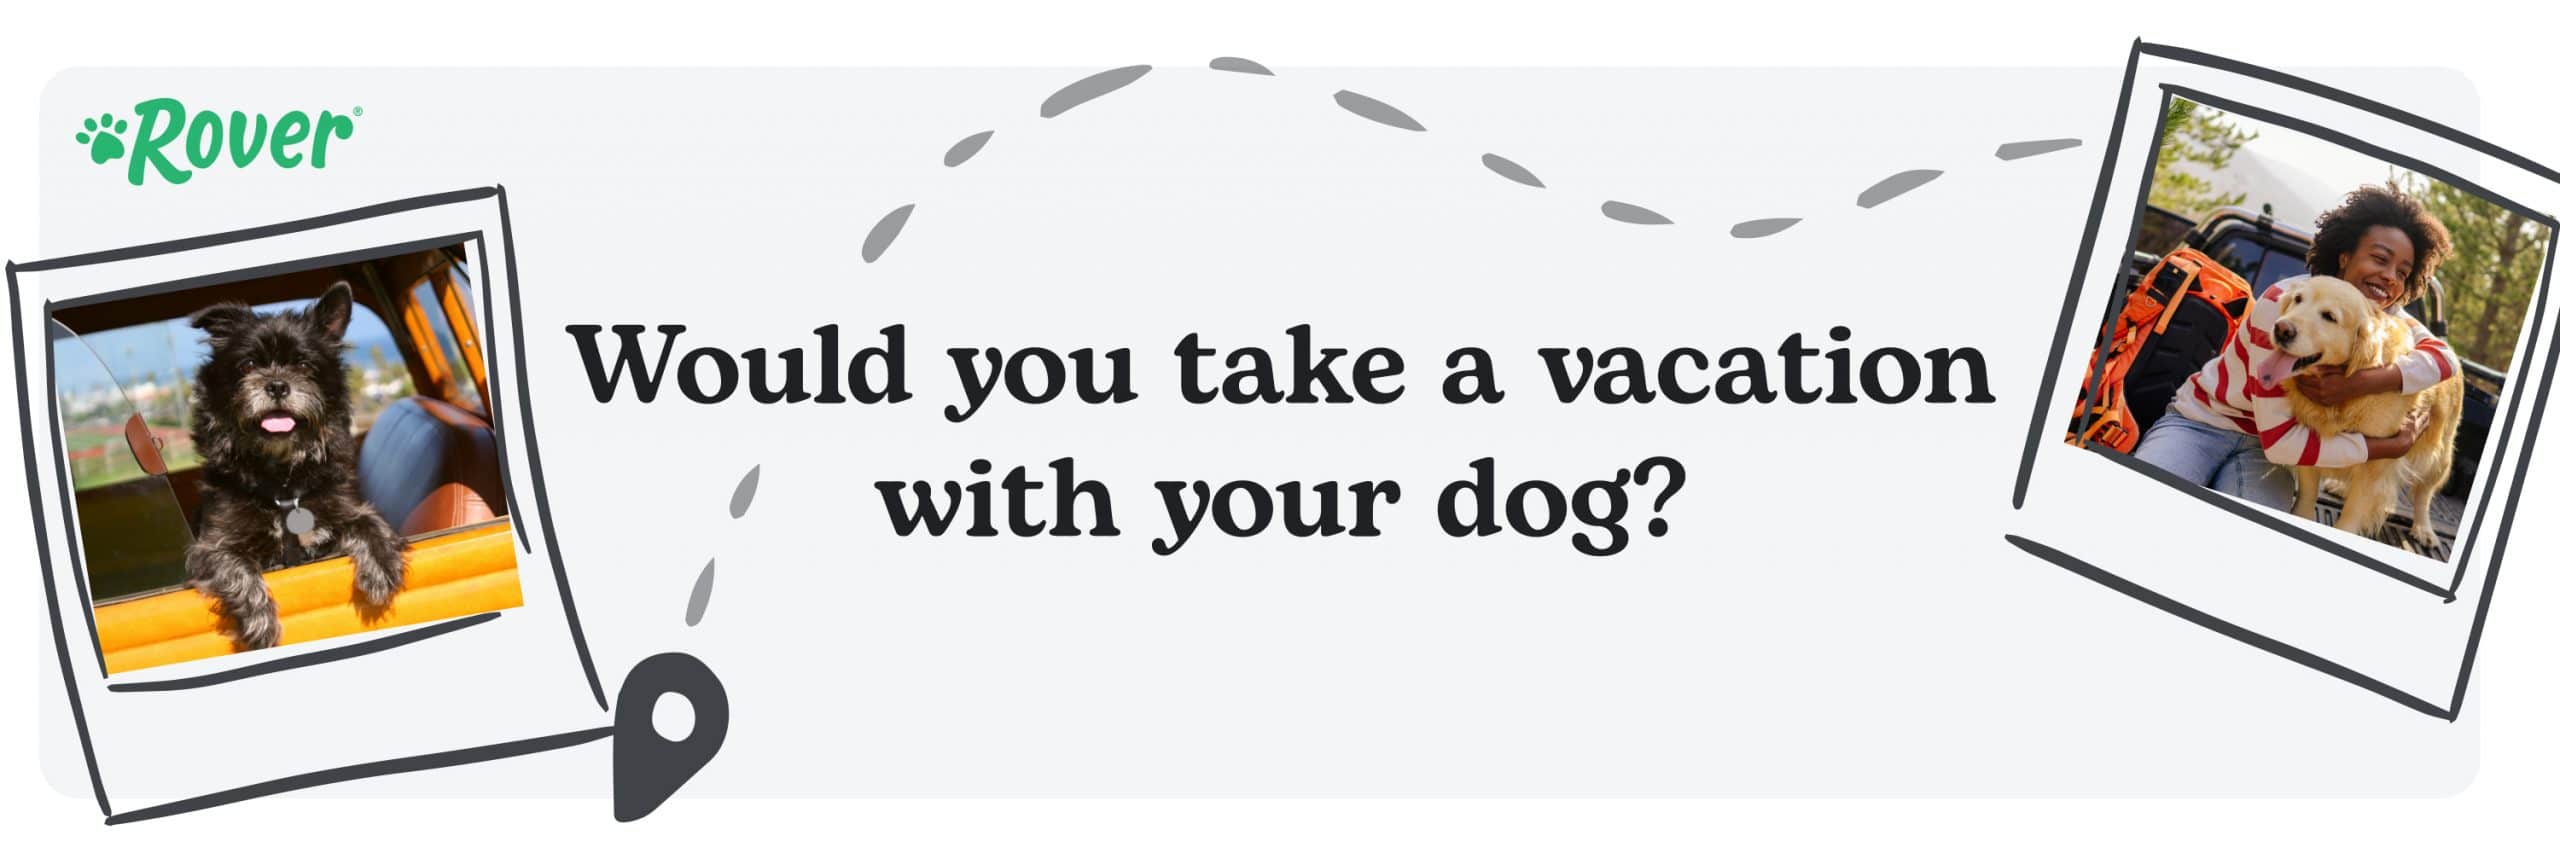 A gray banner with "Would you take a vacation with your dog?" and a picture of dogs traveling.